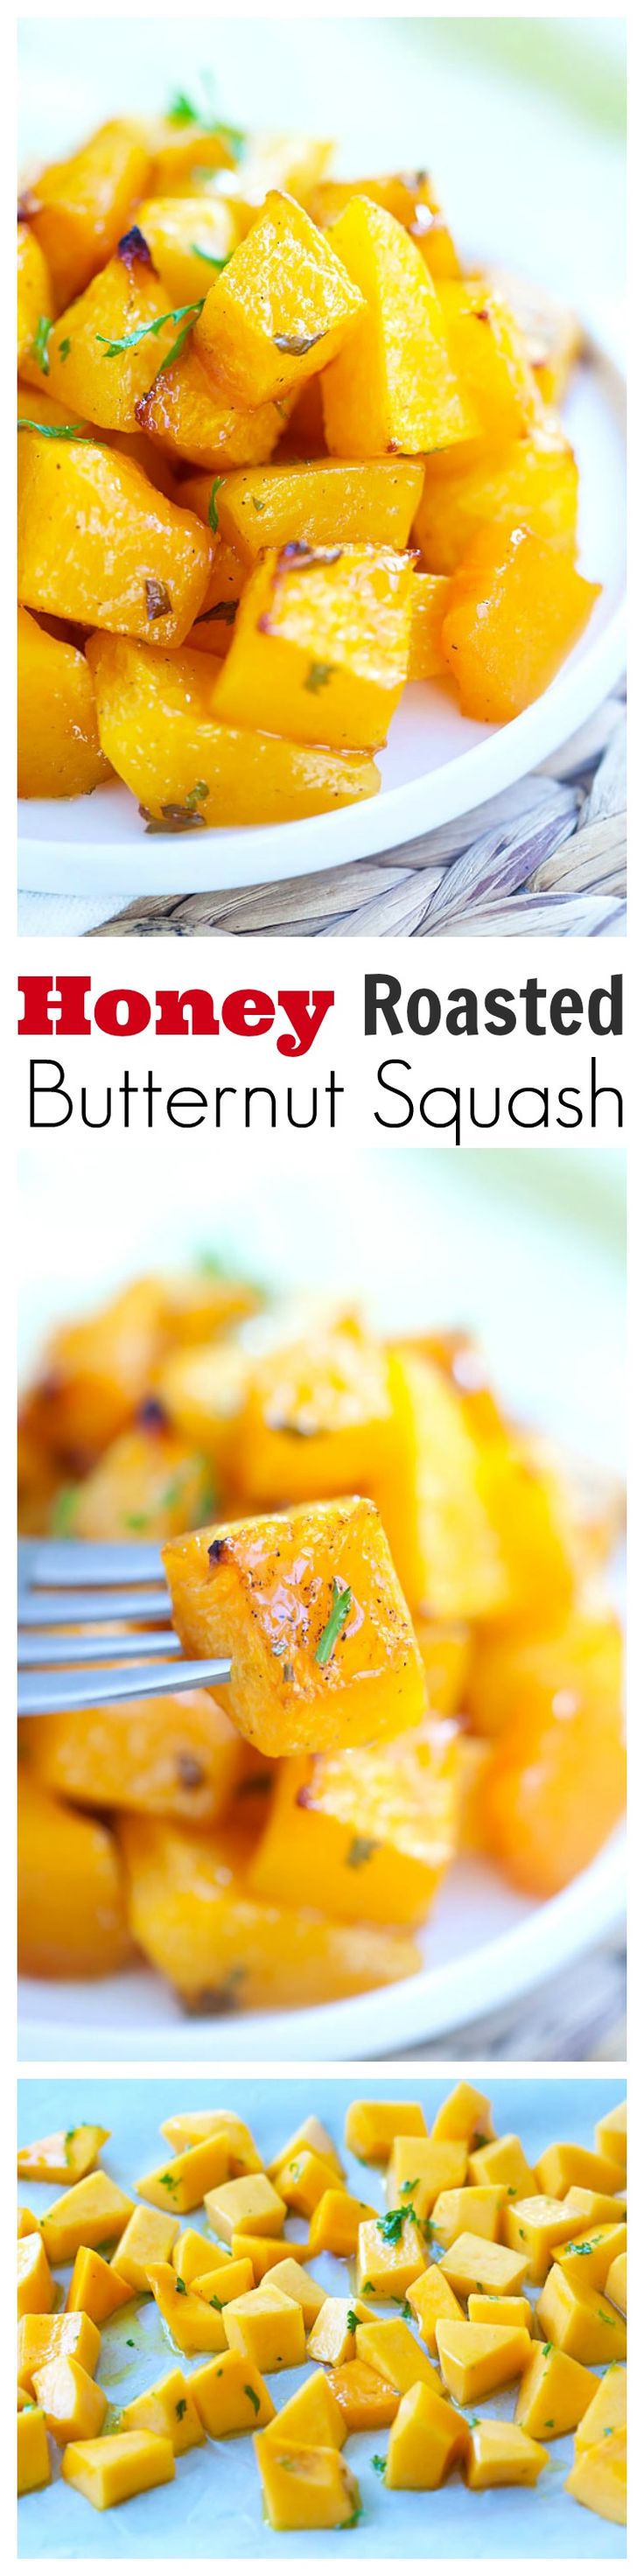 The most delicious roasted butternut squash recipe with butter and honey. Easy recipe and everyone loves this side dish | rasamalaysia.com